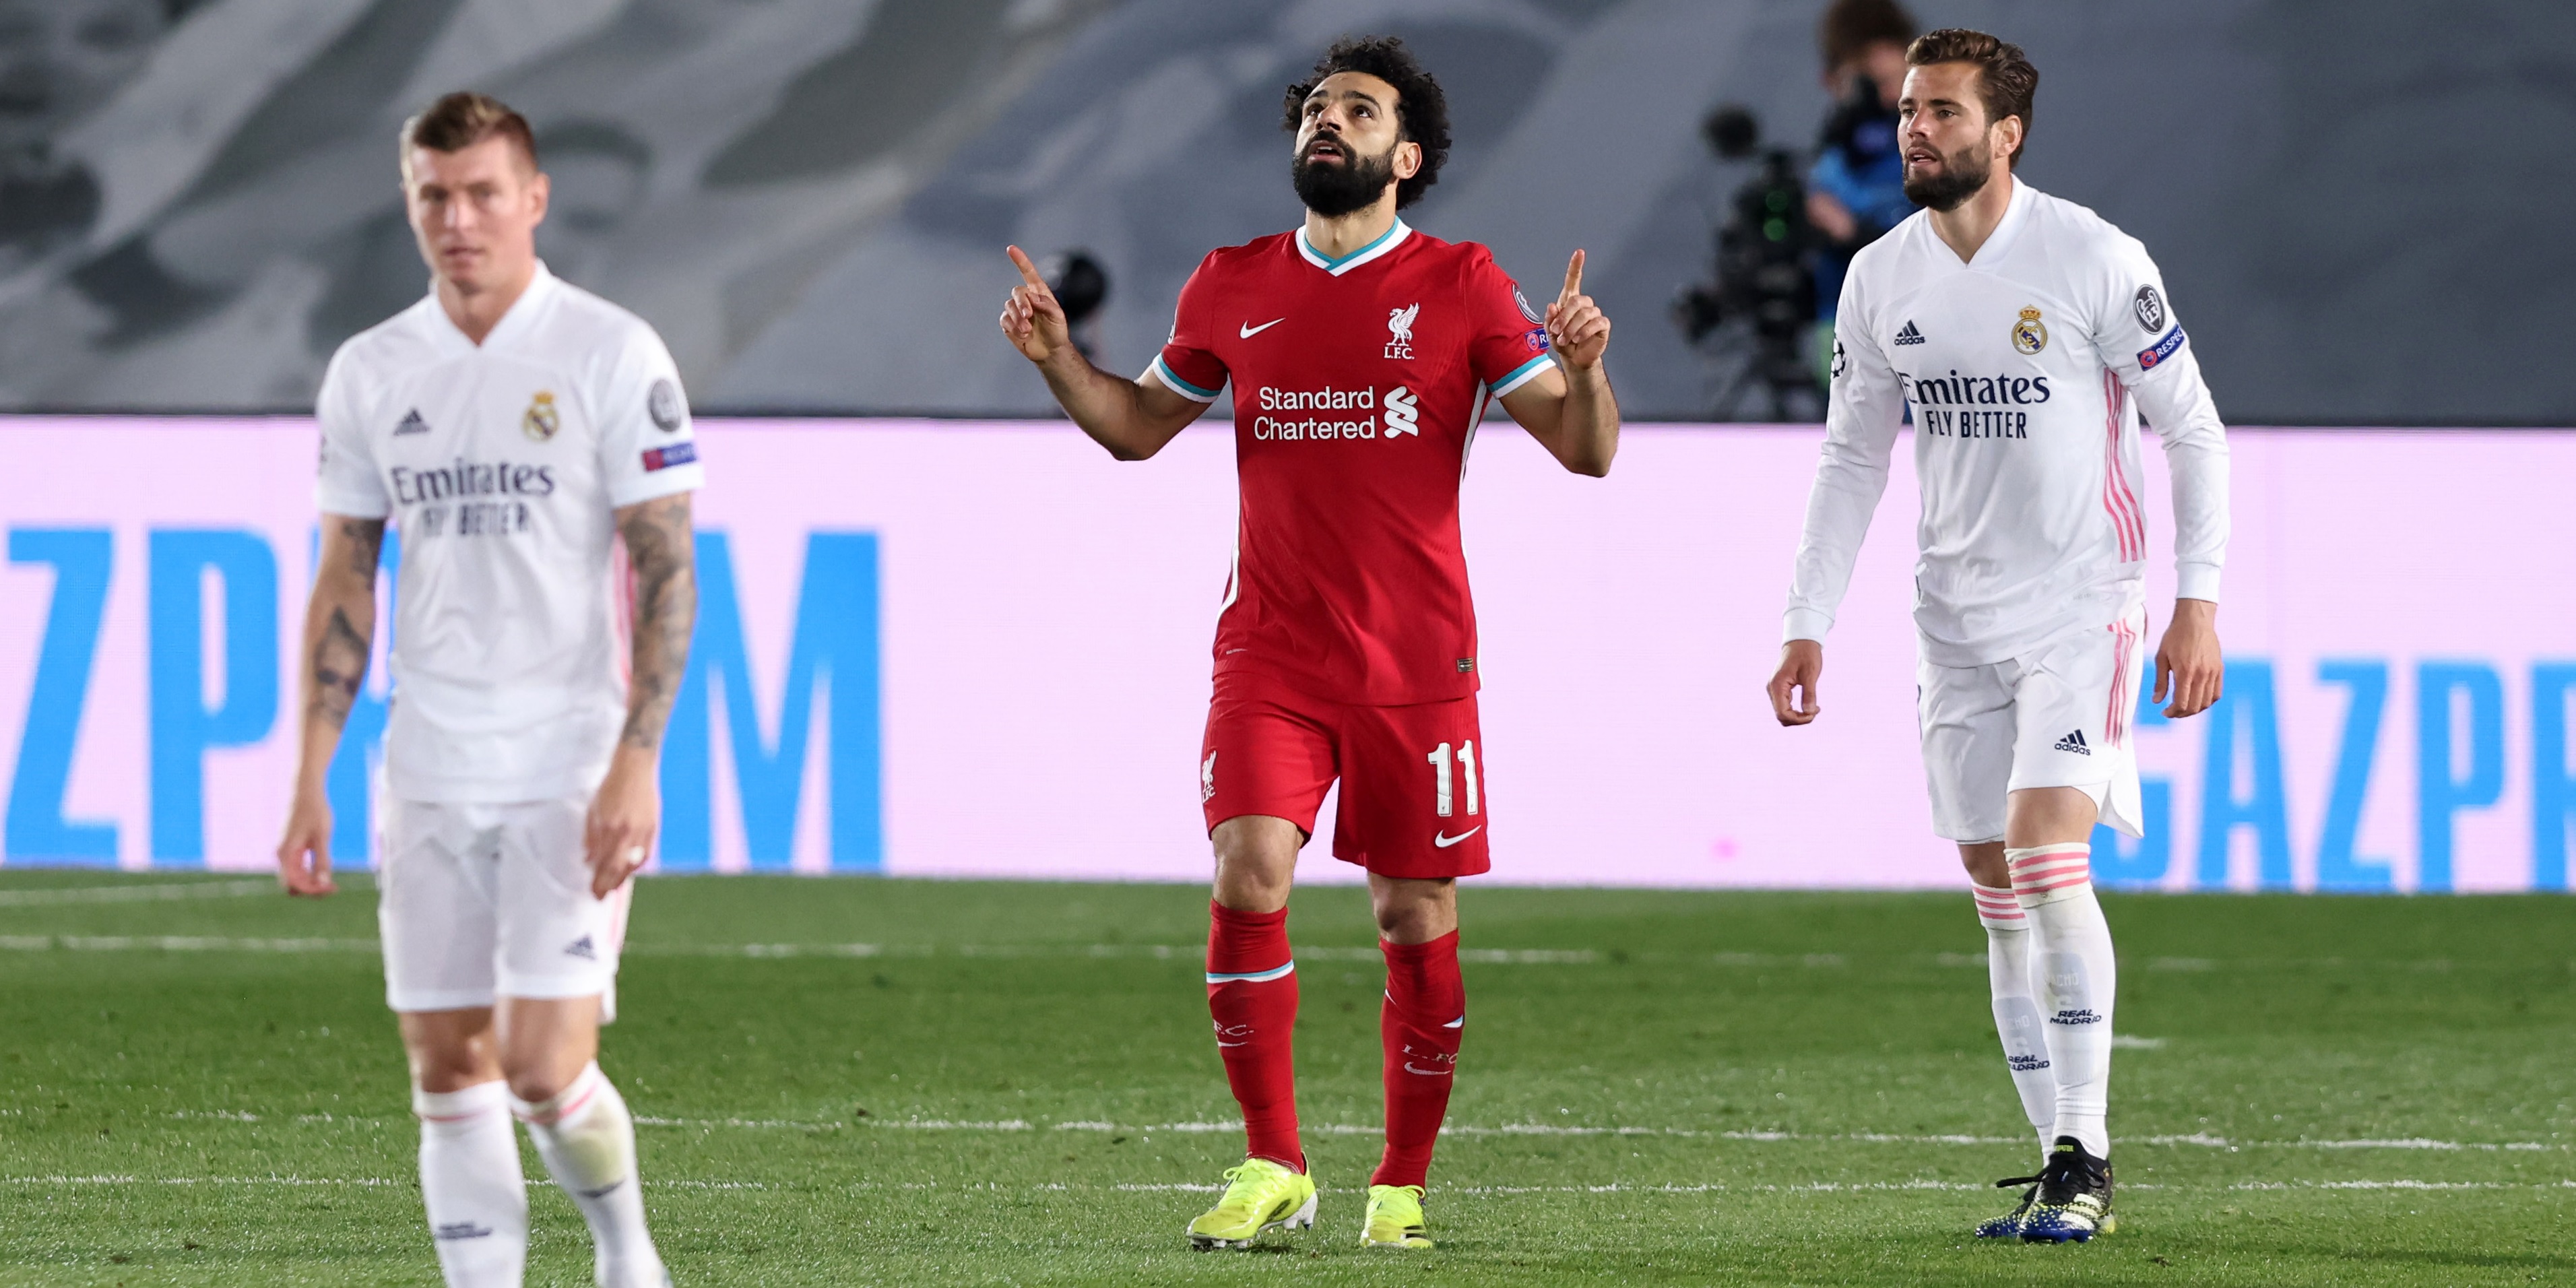 Mo Salah feels Liverpool not moving fast enough with his new contract, with 29 goals so far this season